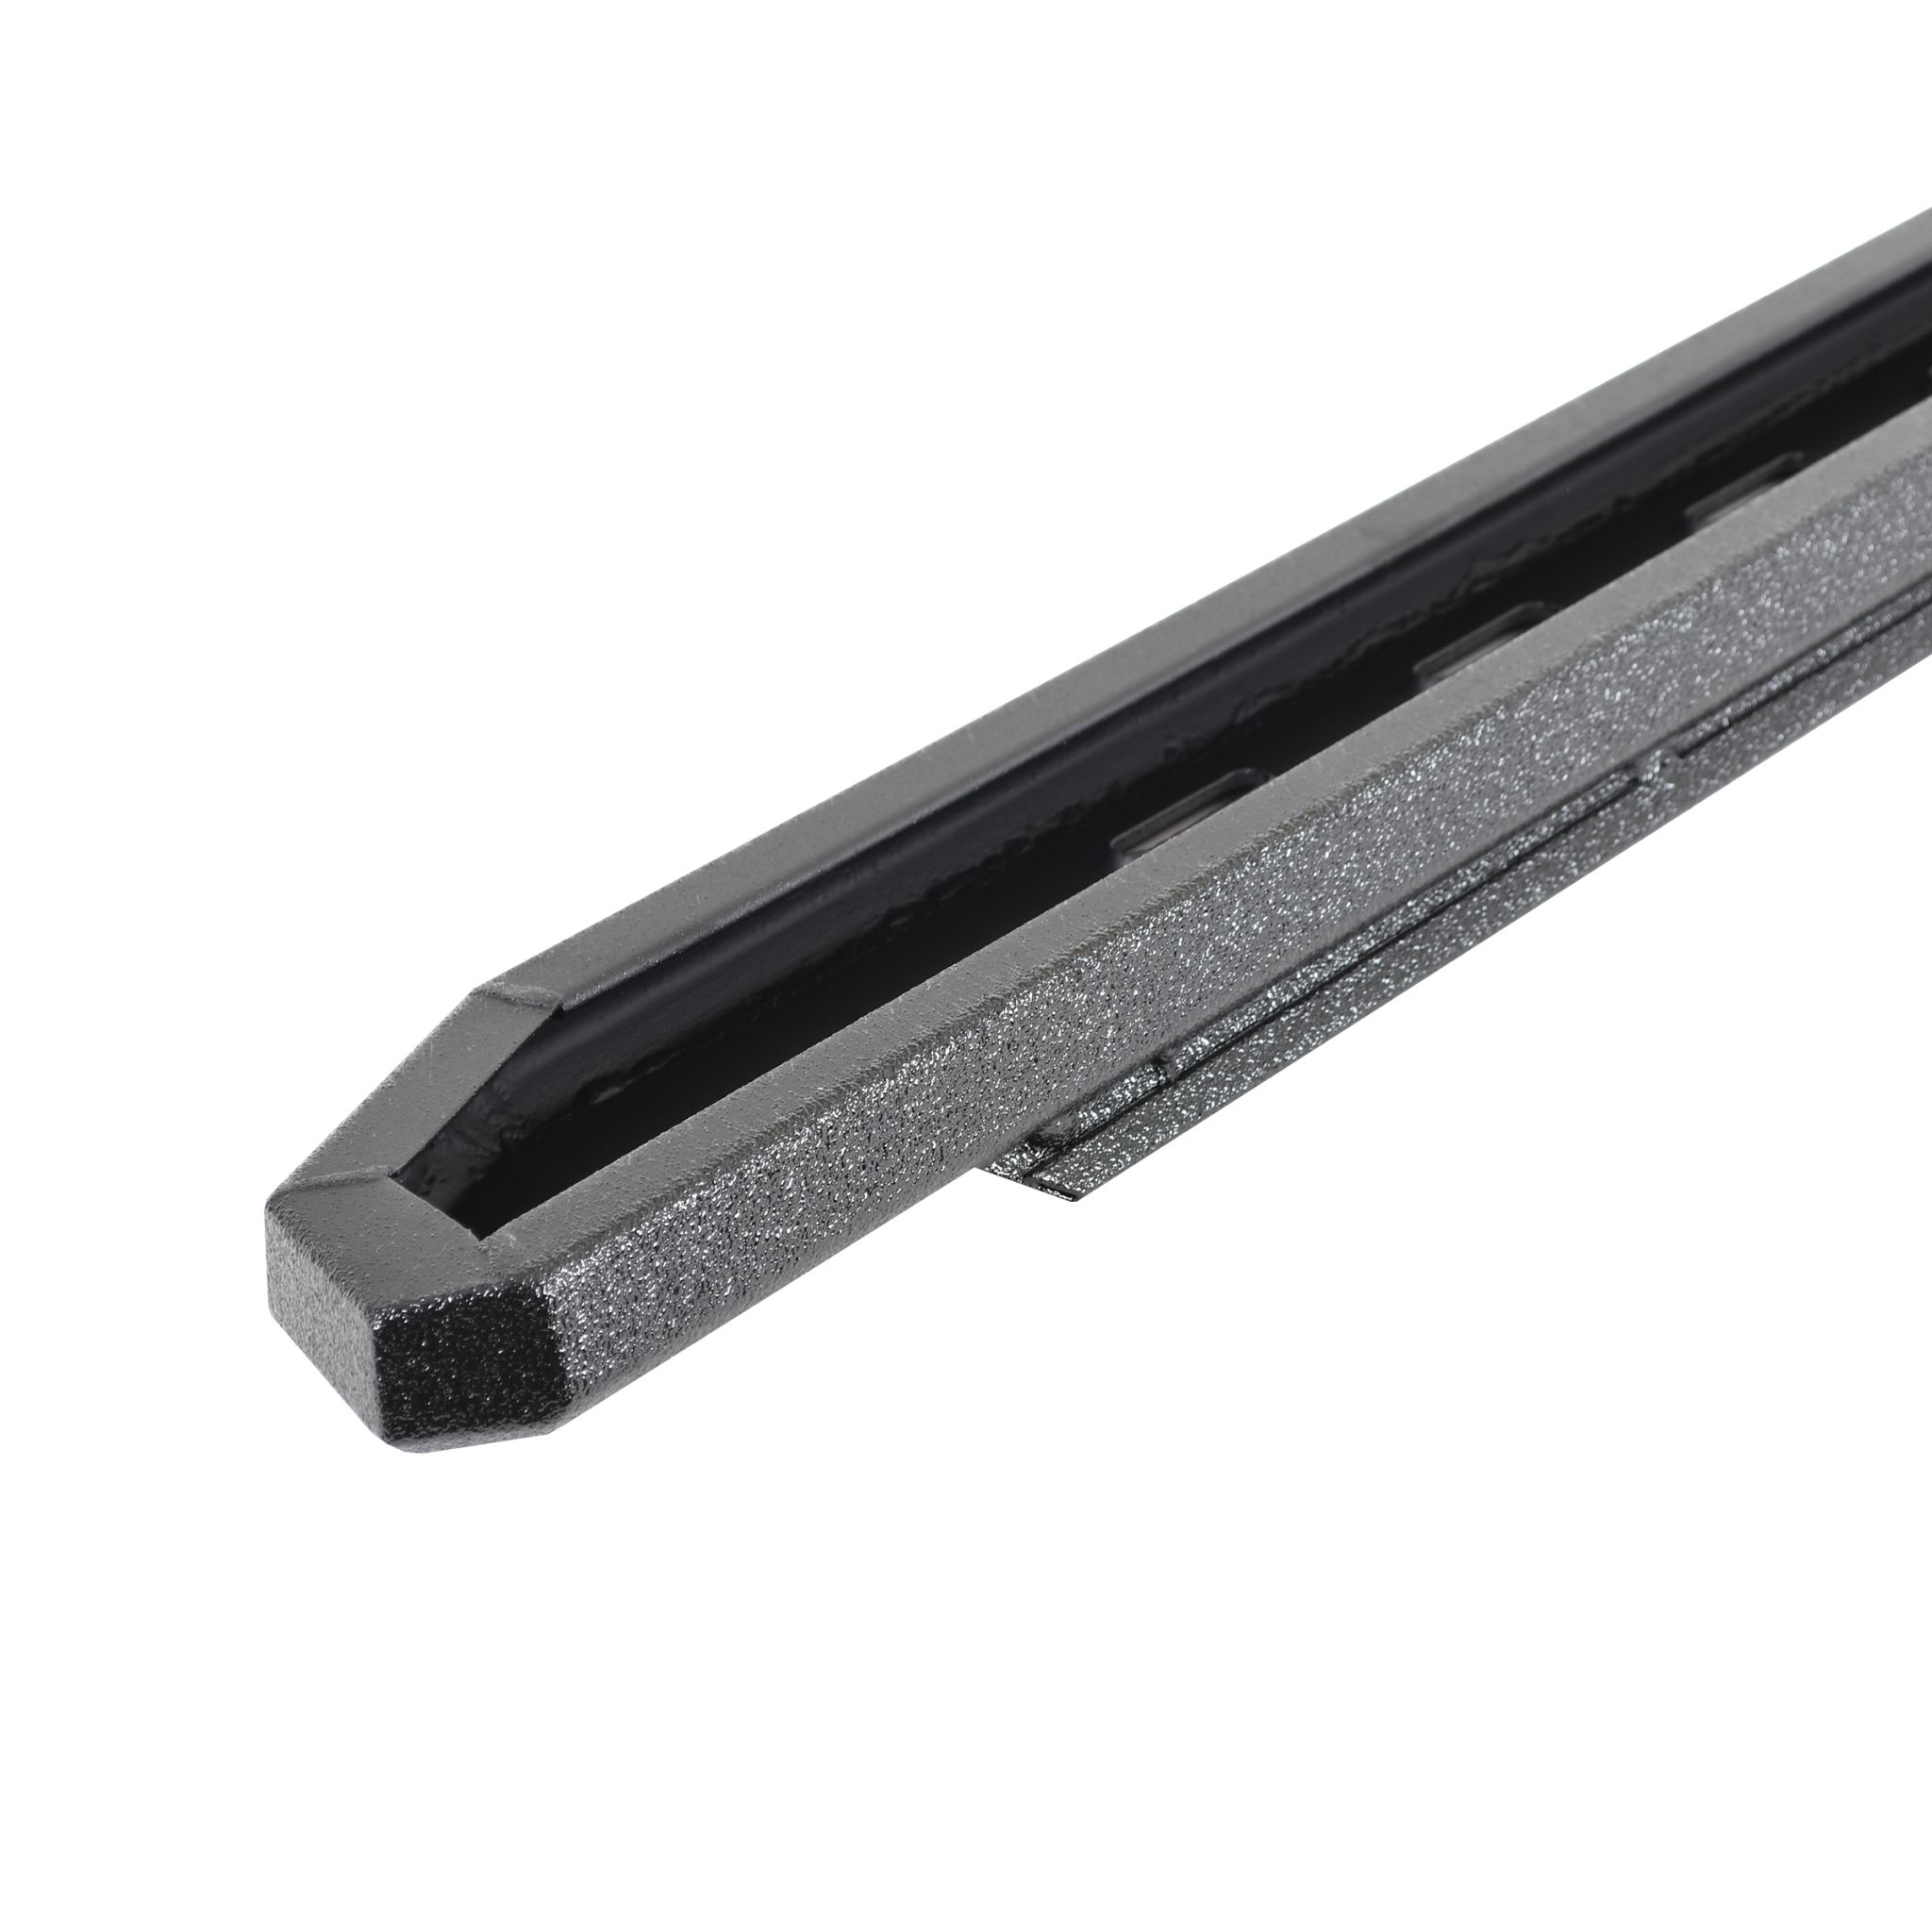 Go Rhino 69600087ST - RB30 Slim Line Running Boards - Boards Only - Protective Bedliner Coating